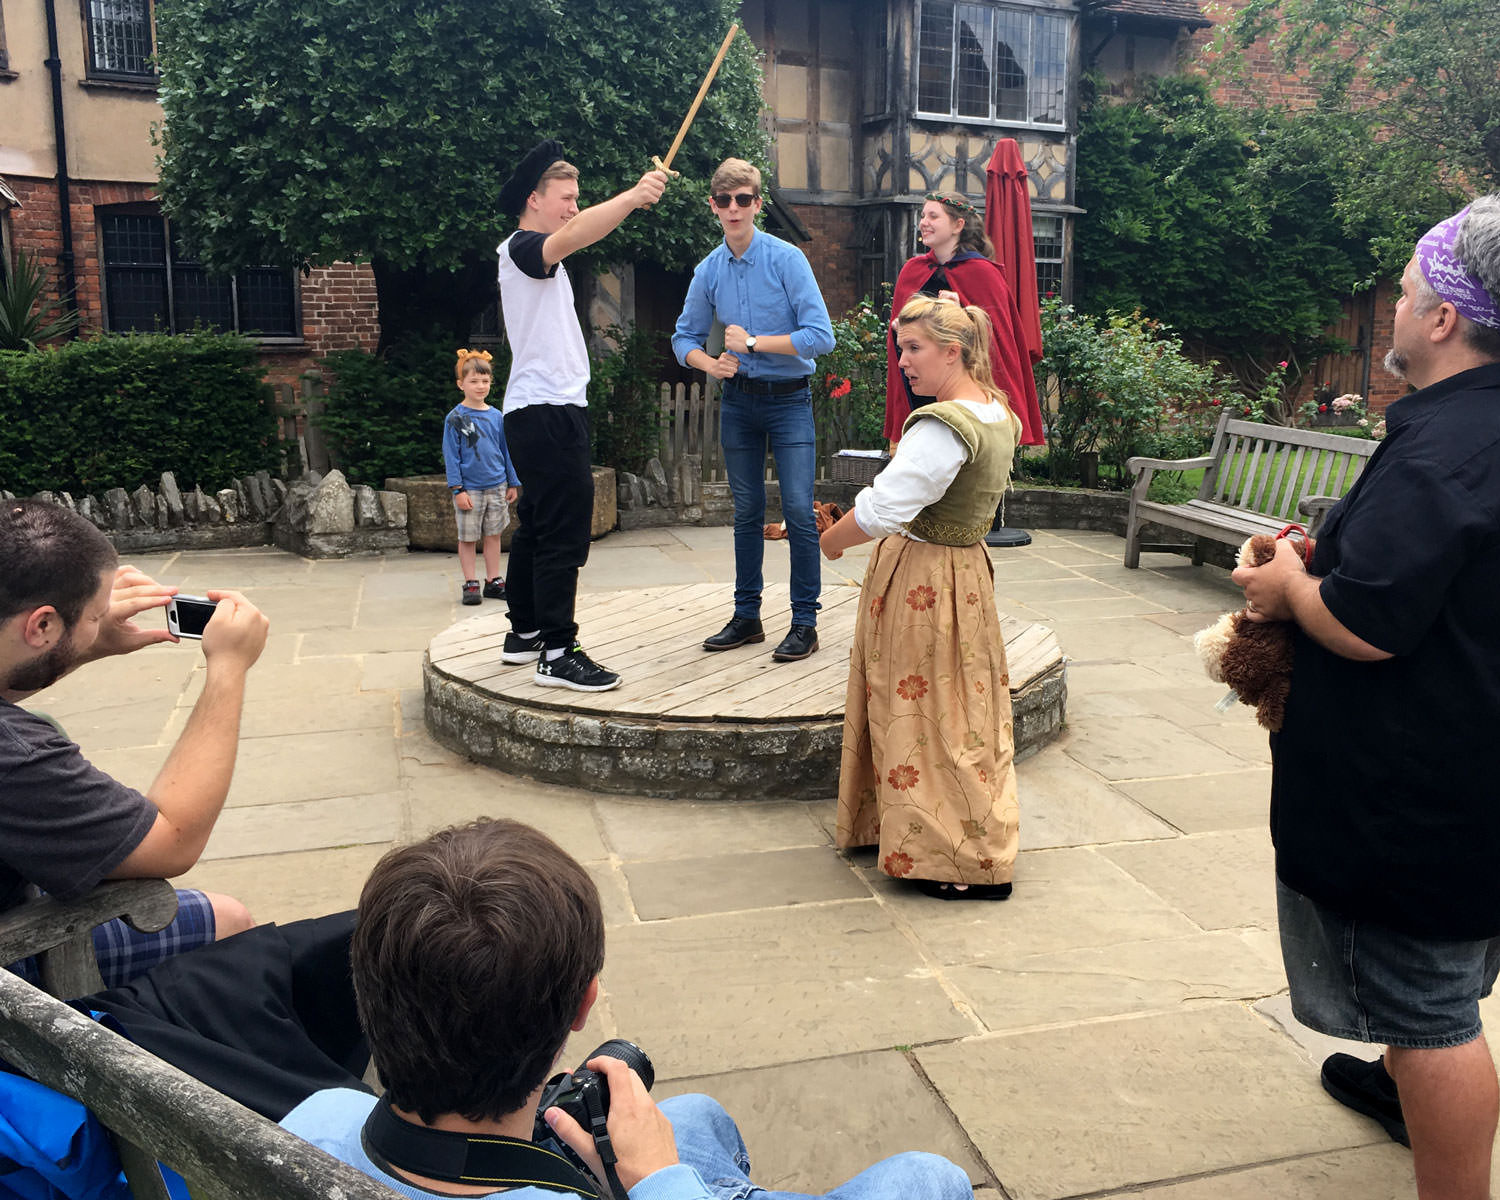 Performing Midsummer Night's Dream at Shakespeare's birthplace